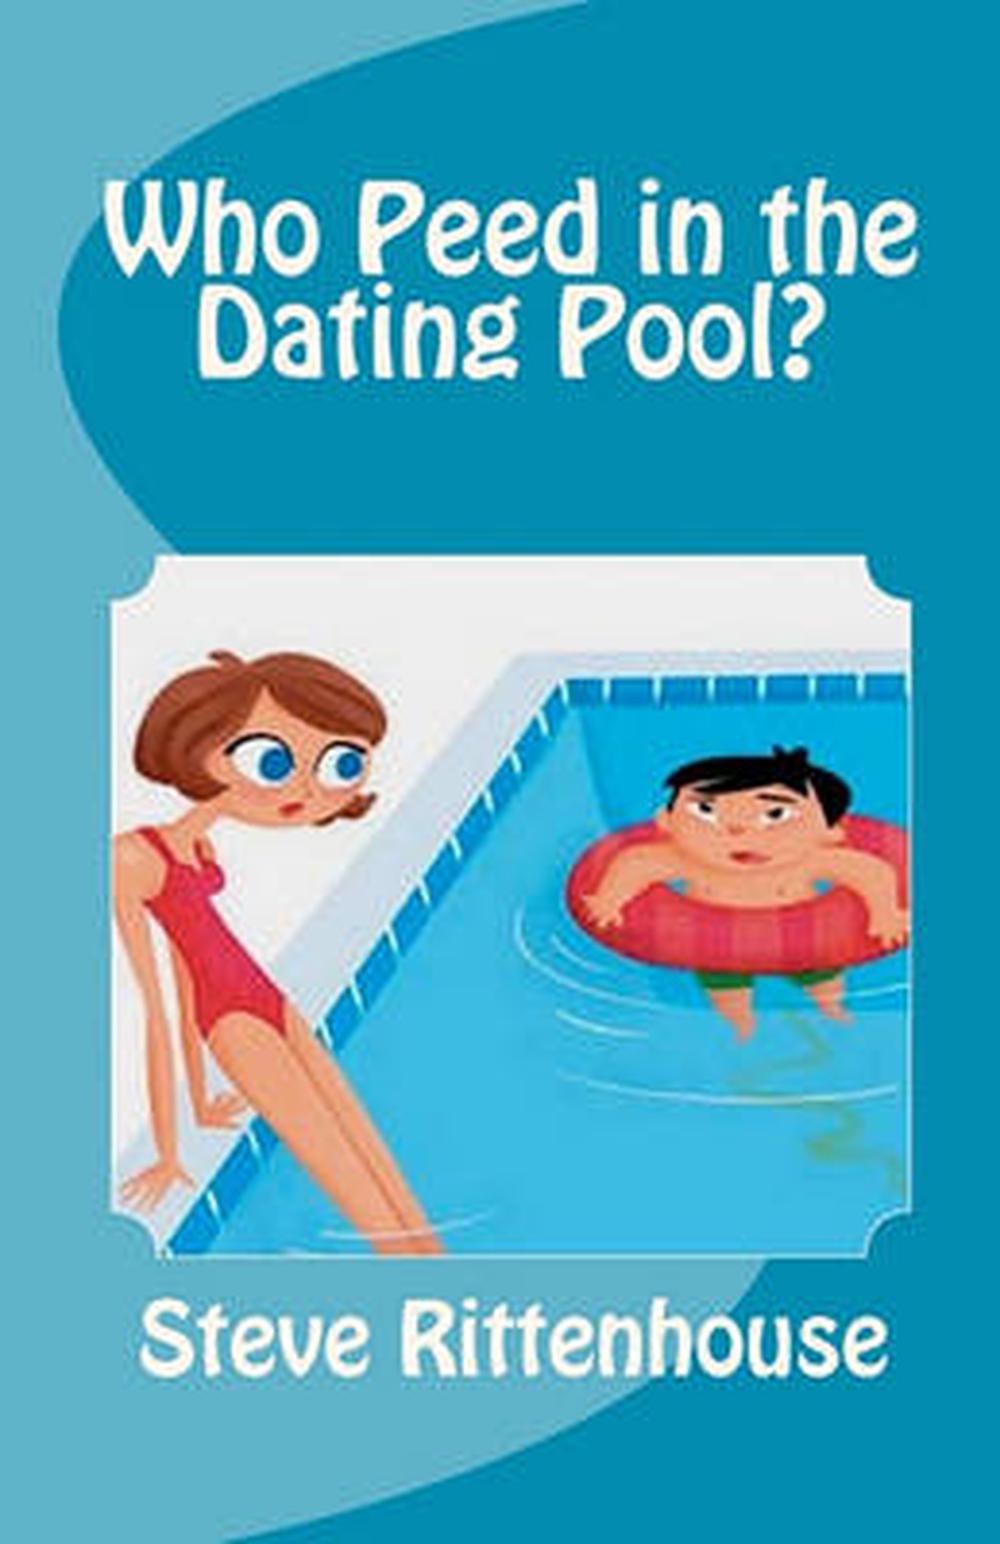 dating pool meaning